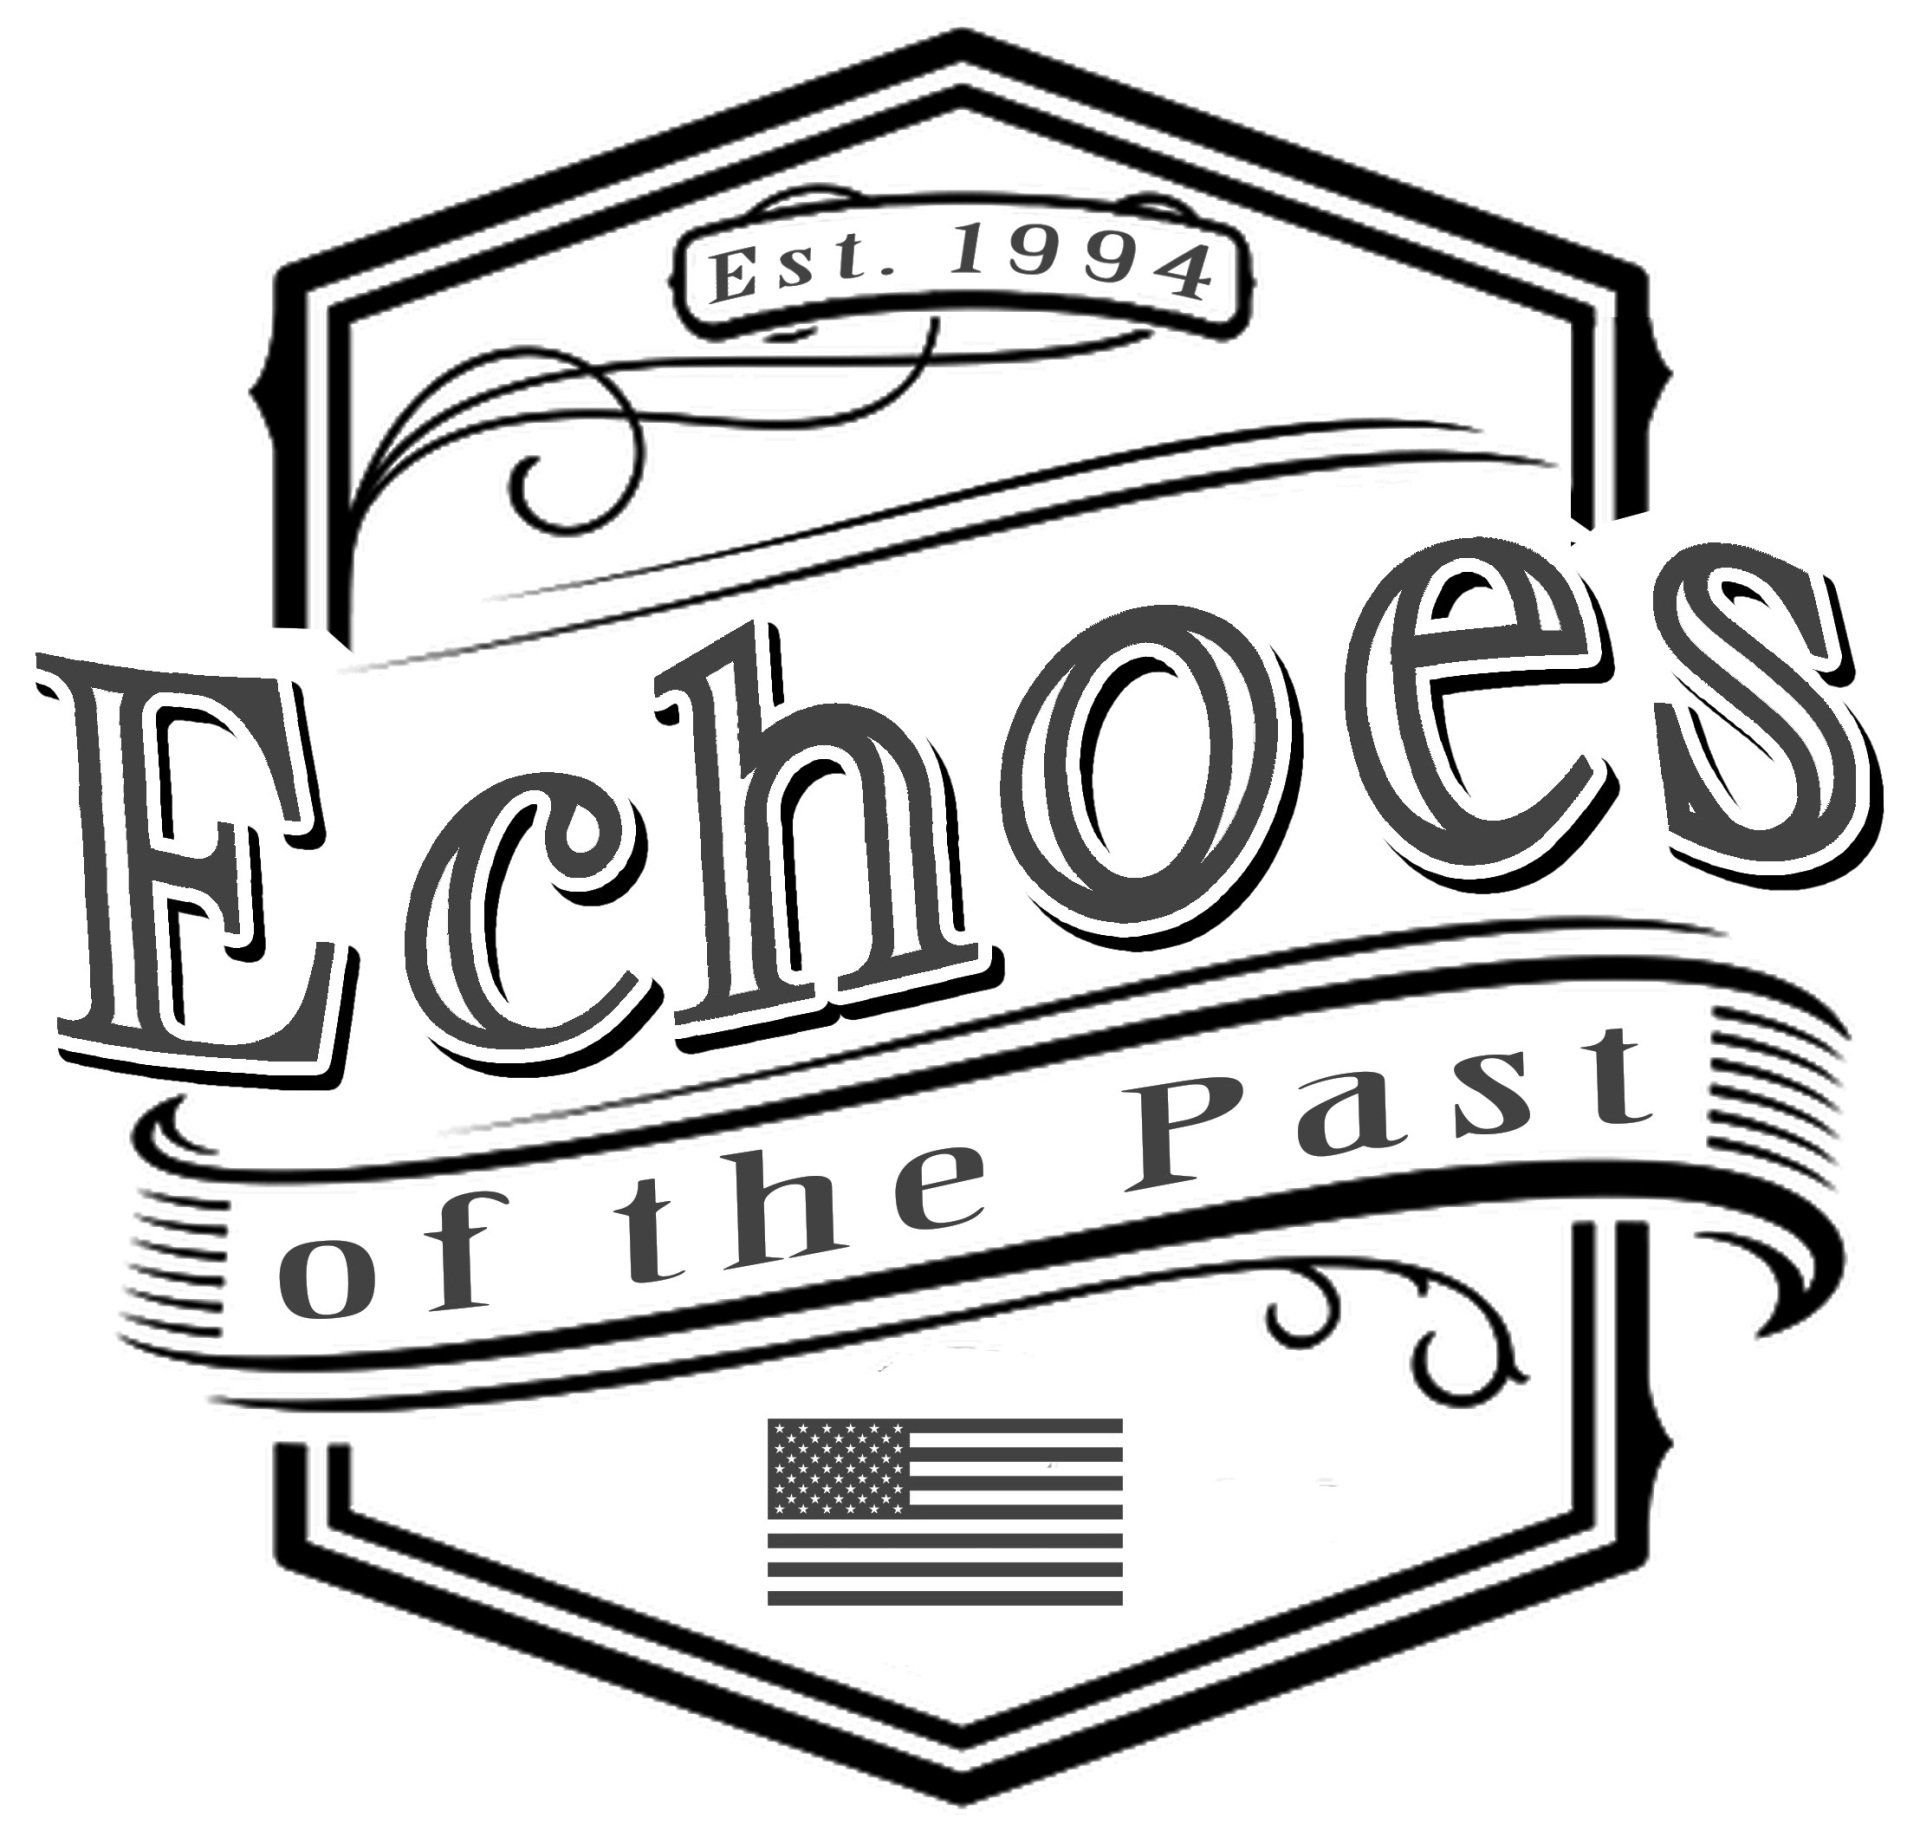 The Echoes Of The Past Established 1994